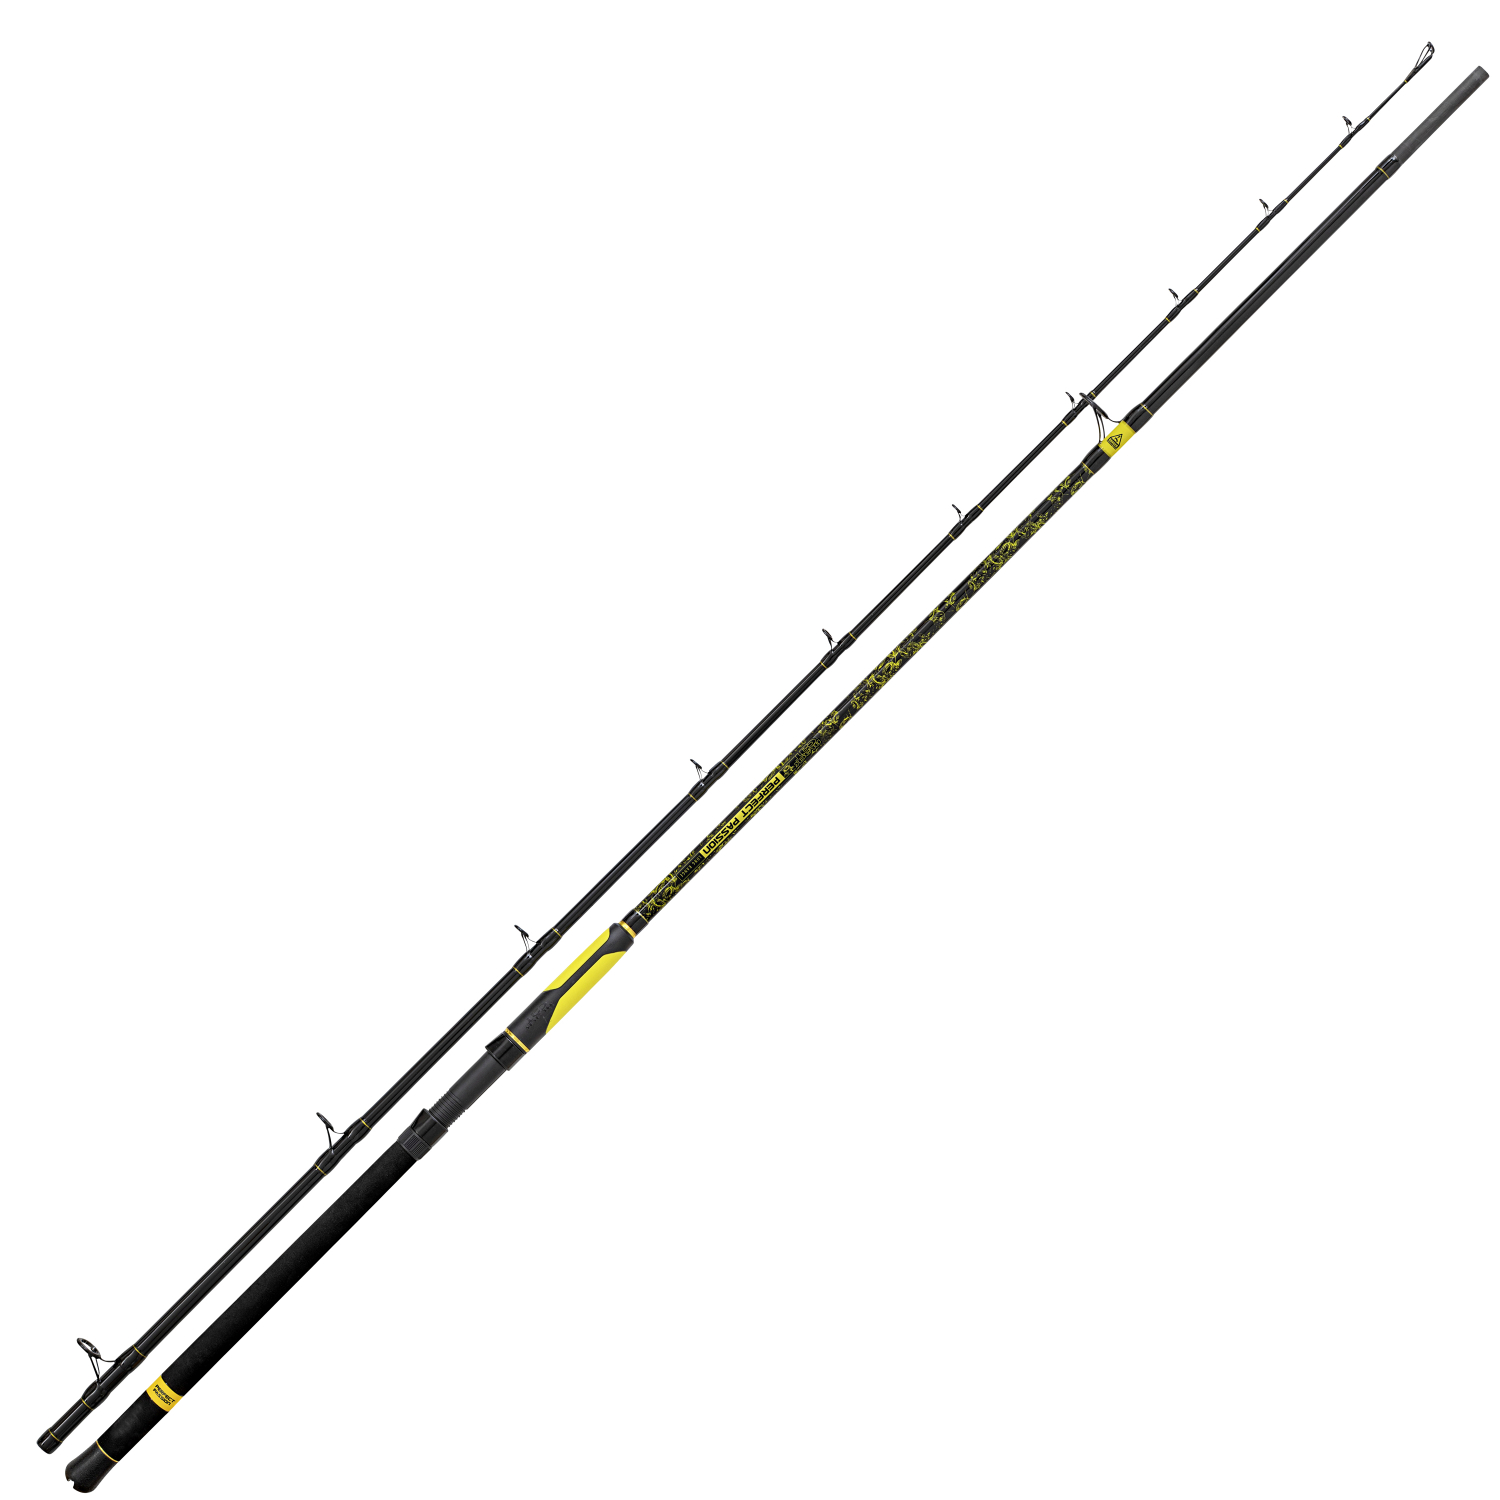 Black Cat Fishing Rod Perfect Passion Long Range at low prices